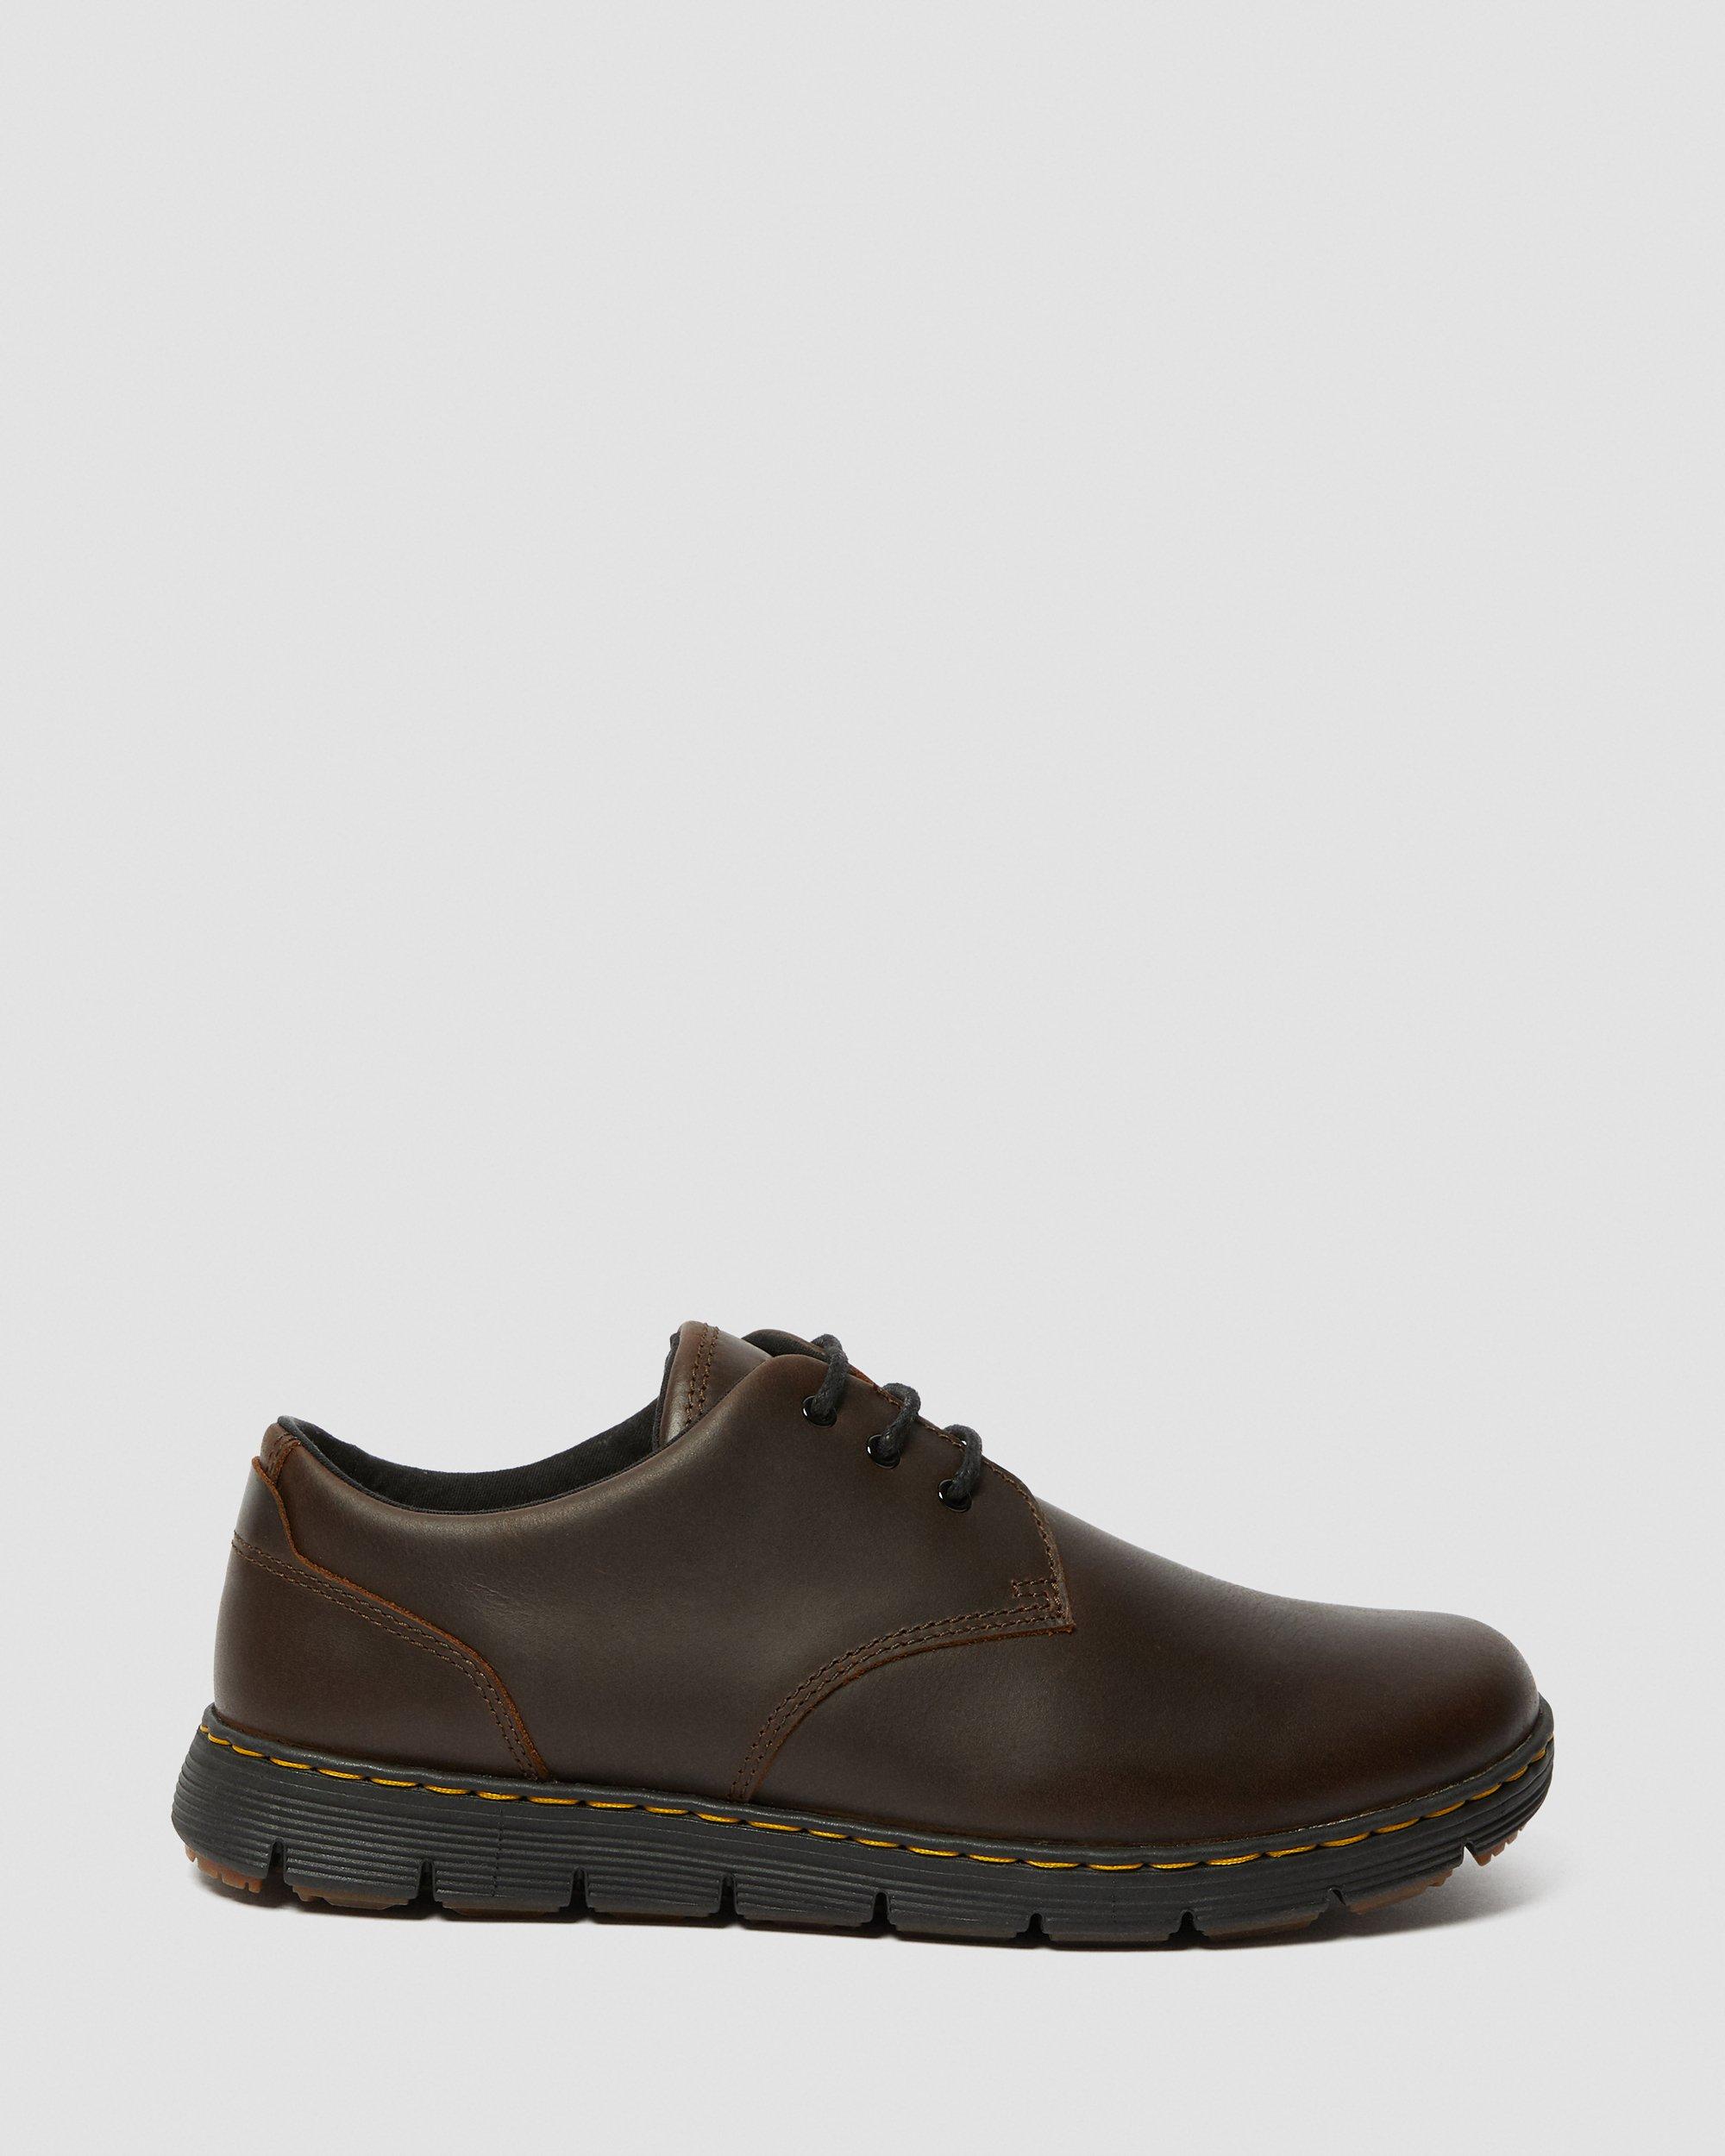 Rhodes Men's Leather Casual Shoes in Brown